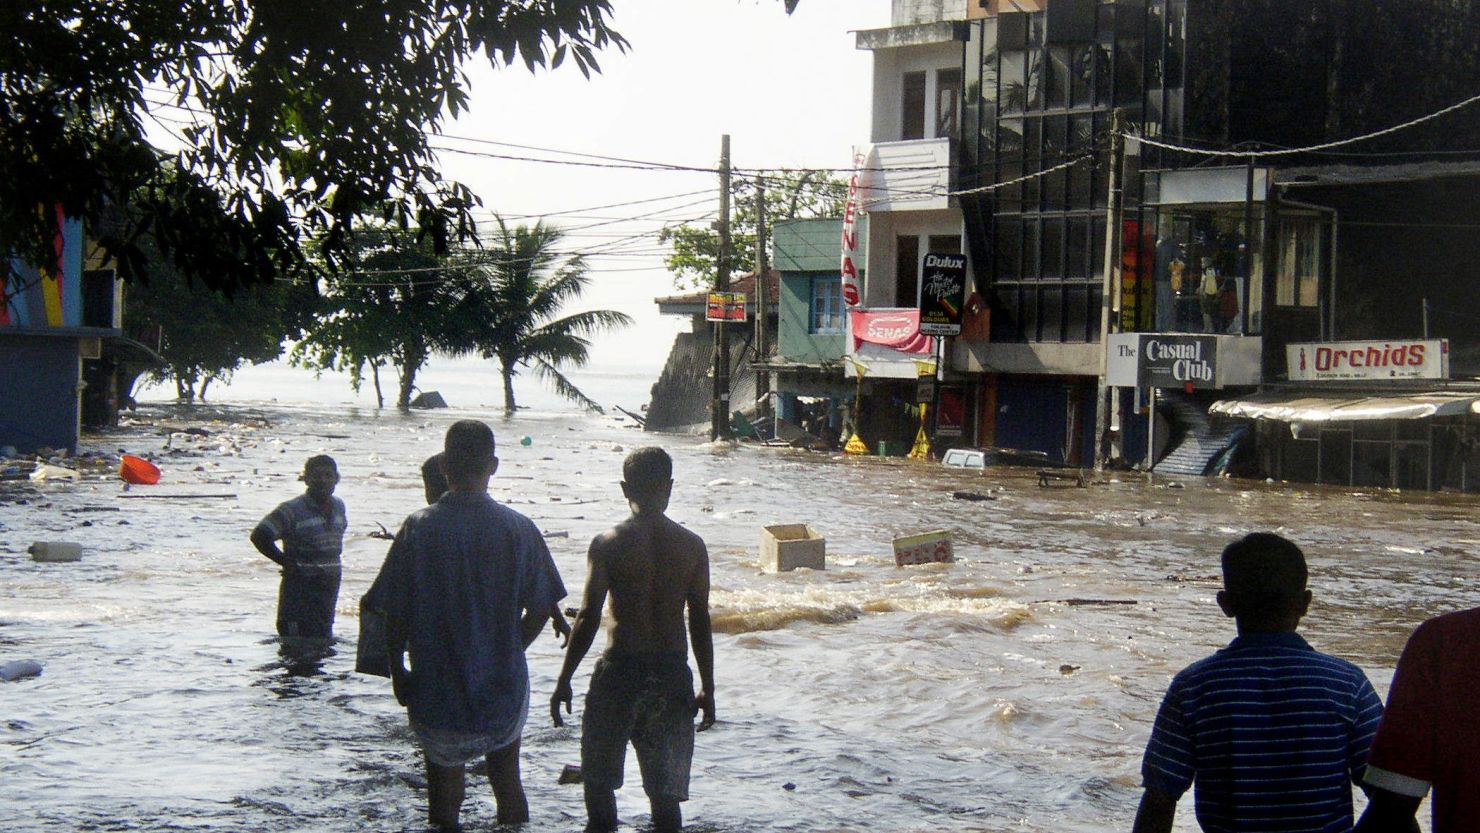 In this picture taken 26 December 2004, Sri Lankan pedestrians walk through floodwaters in a main street of Galle, after the coastal town was hit by a tidal wave.